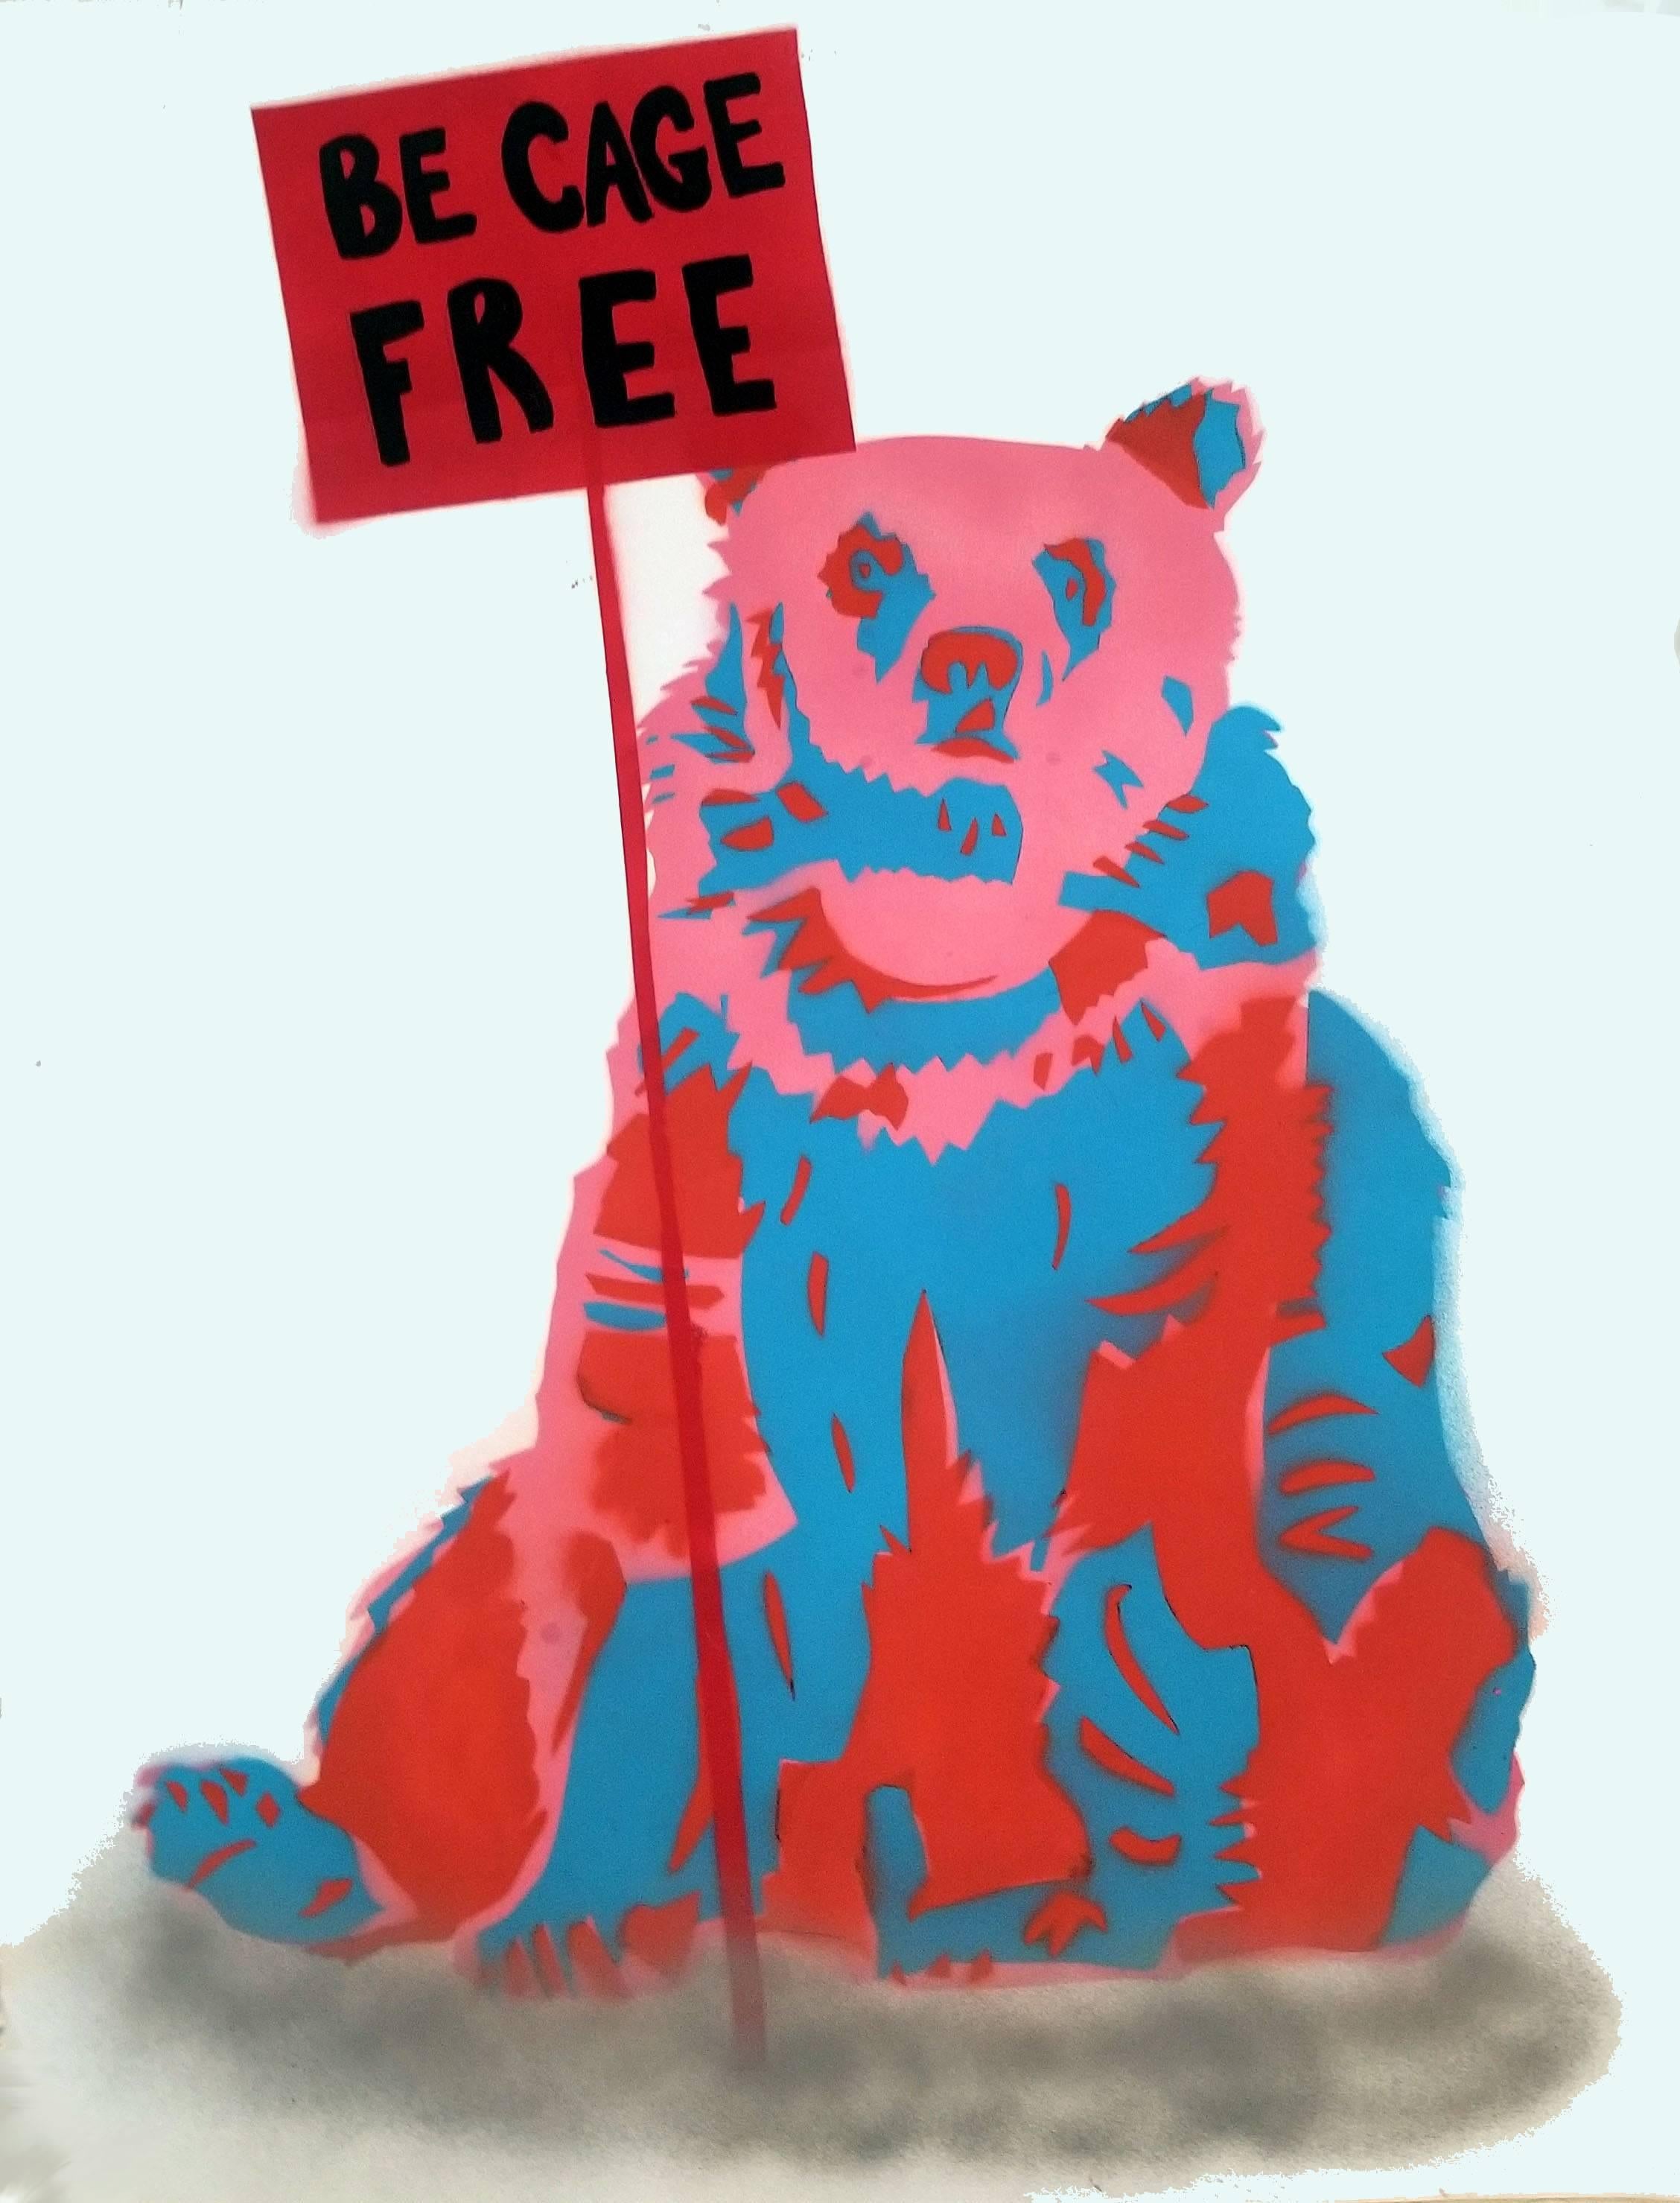 Grizzly: Be Cage Free - Mixed Media Art by K.K.